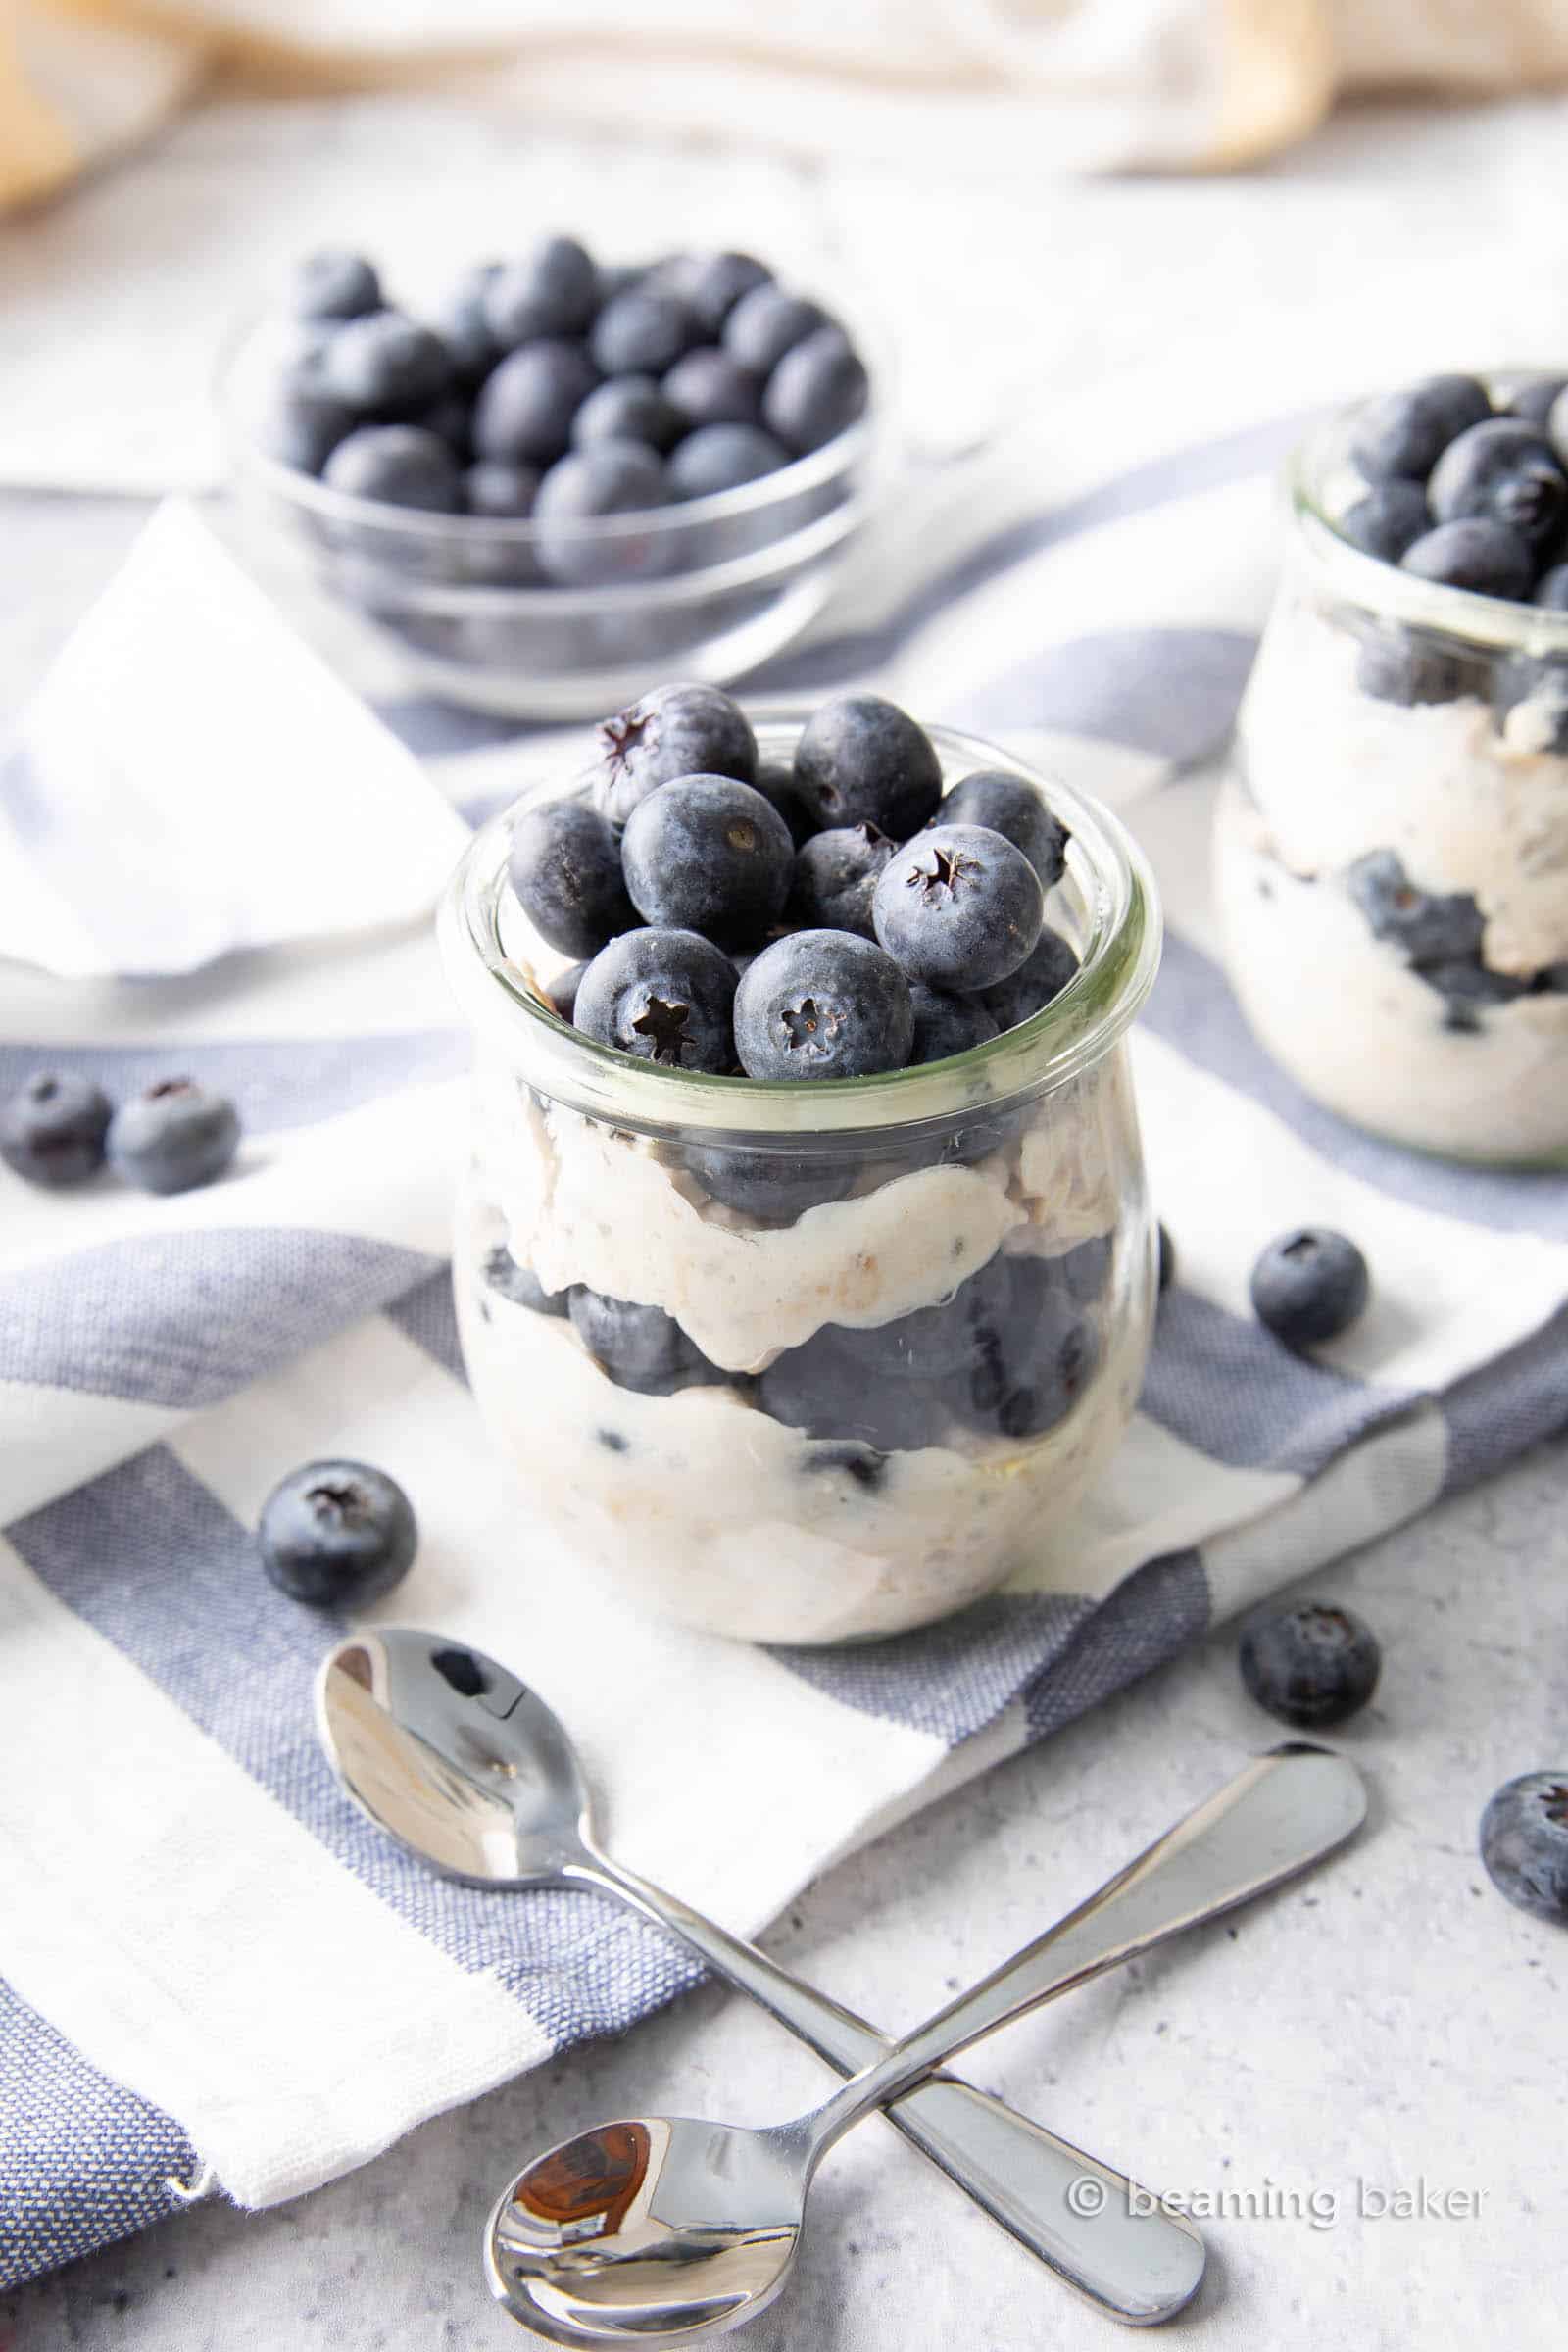 Healthy Overnight Oats with Almond Milk and Blueberries: learn how to make overnight oats with almond milk! Quick & easy almond milk breakfast in a jar—the best overnight oats with almond milk. #OvernightOats #AlmondMilk #Breakfast #Healthy | Recipe at BeamingBaker.com